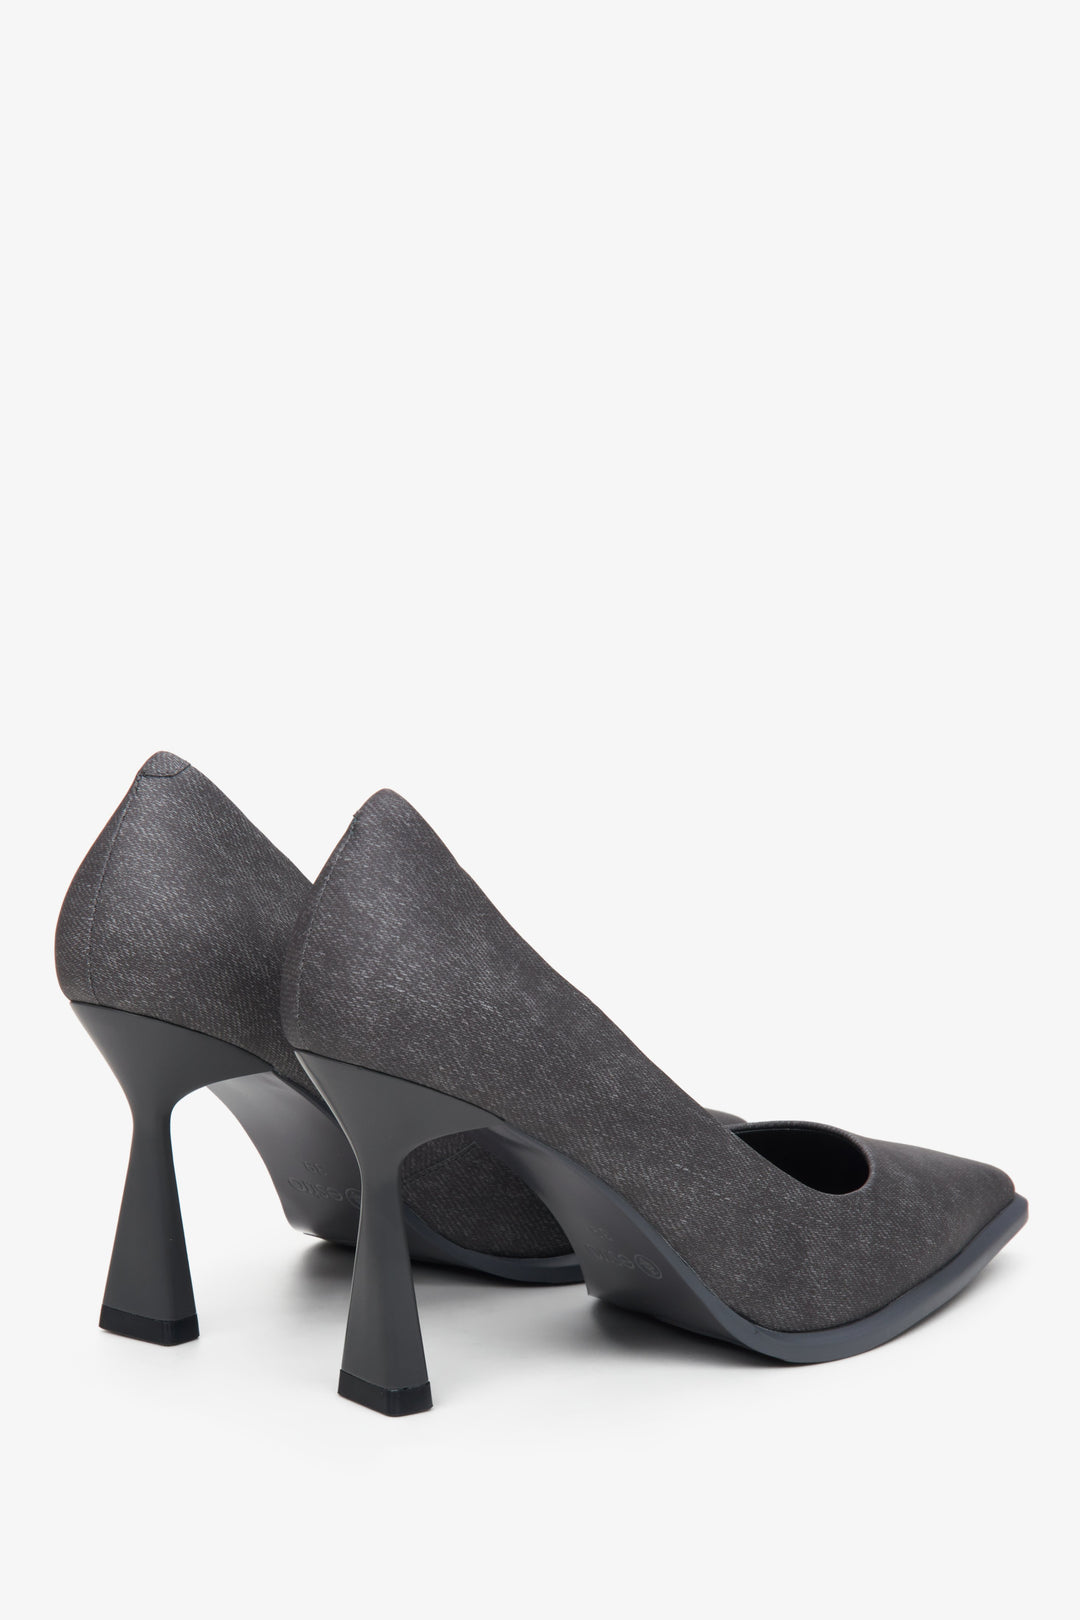 Women's dark grey denim pumps by Estro - close-up on the heel and side line of the shoes.